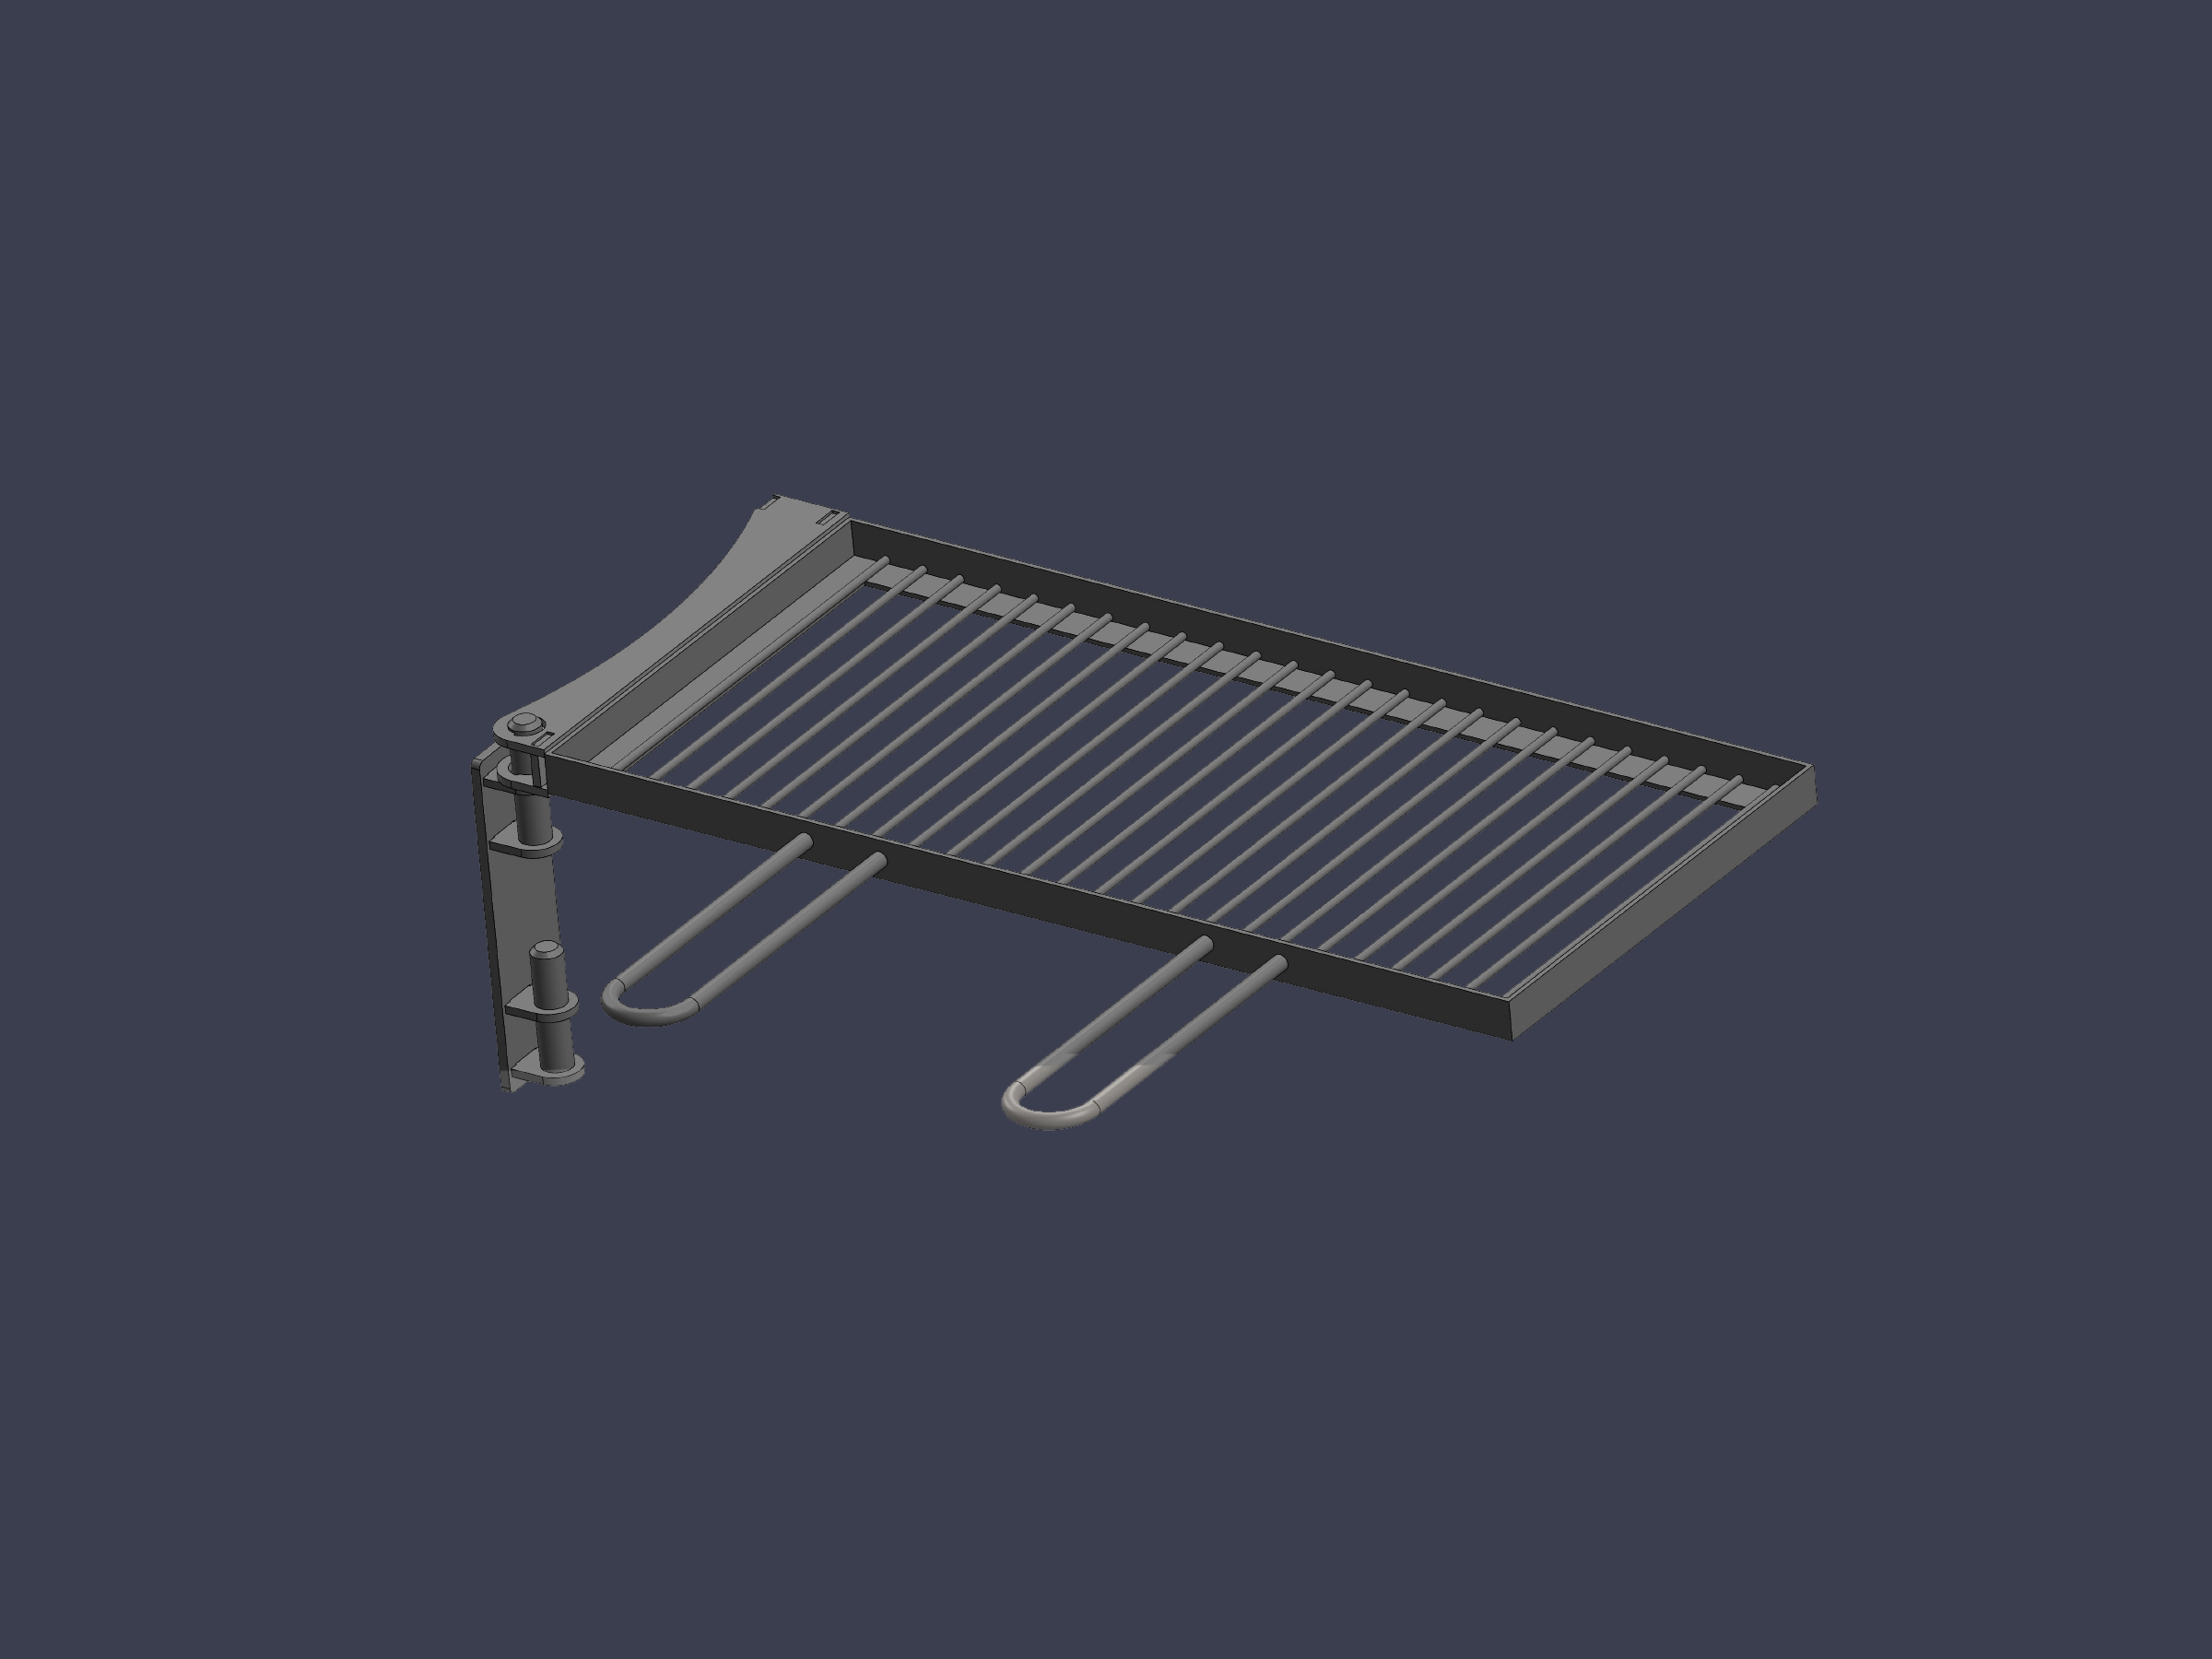 Swinging cooking grill for open fire cooking